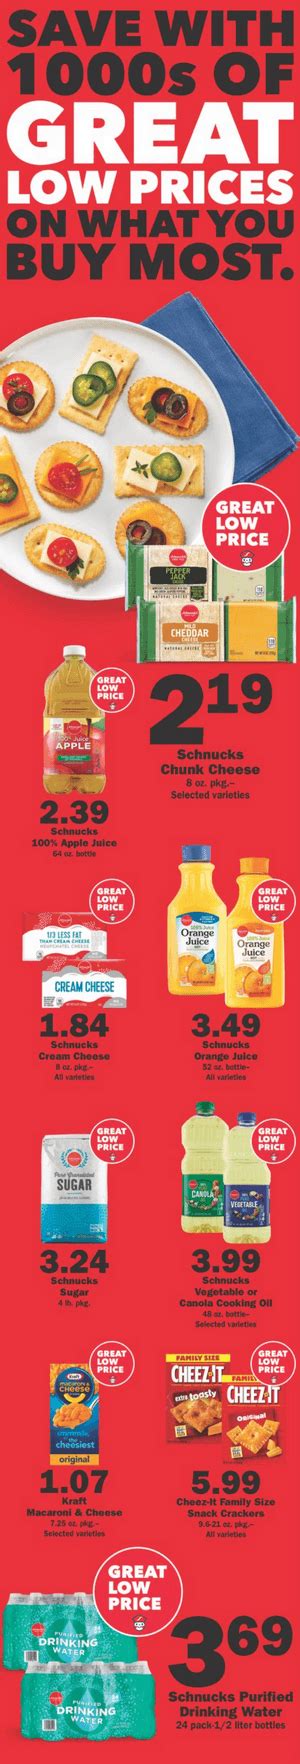 Is schnucks open on memorial day. Dec 5, 2020 ... ... Memorial Day weekend and Labor Day Weekend including the holidays themselves. Some departments like Deli, Meat, or Seafood might require or ... 